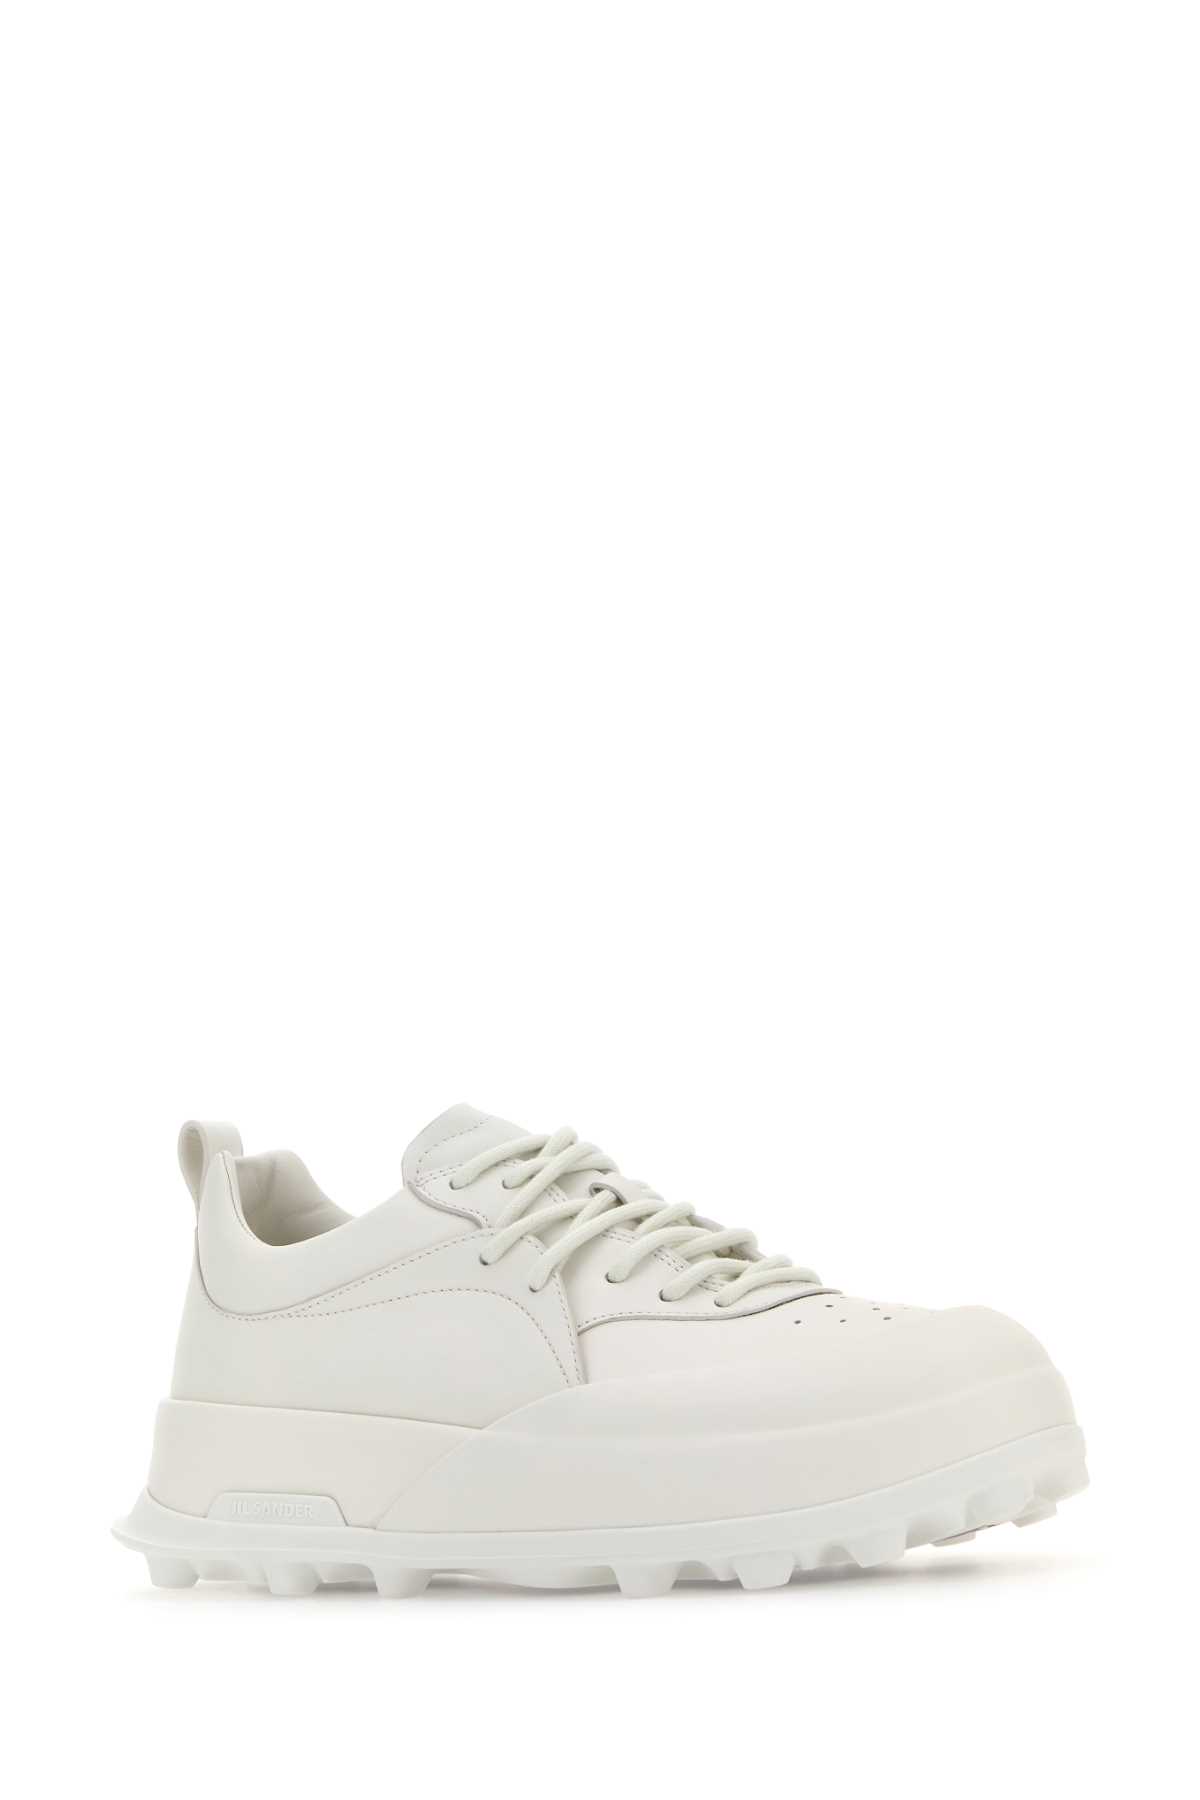 Jil Sander White Leather And Rubber Orb Sneakers In 102